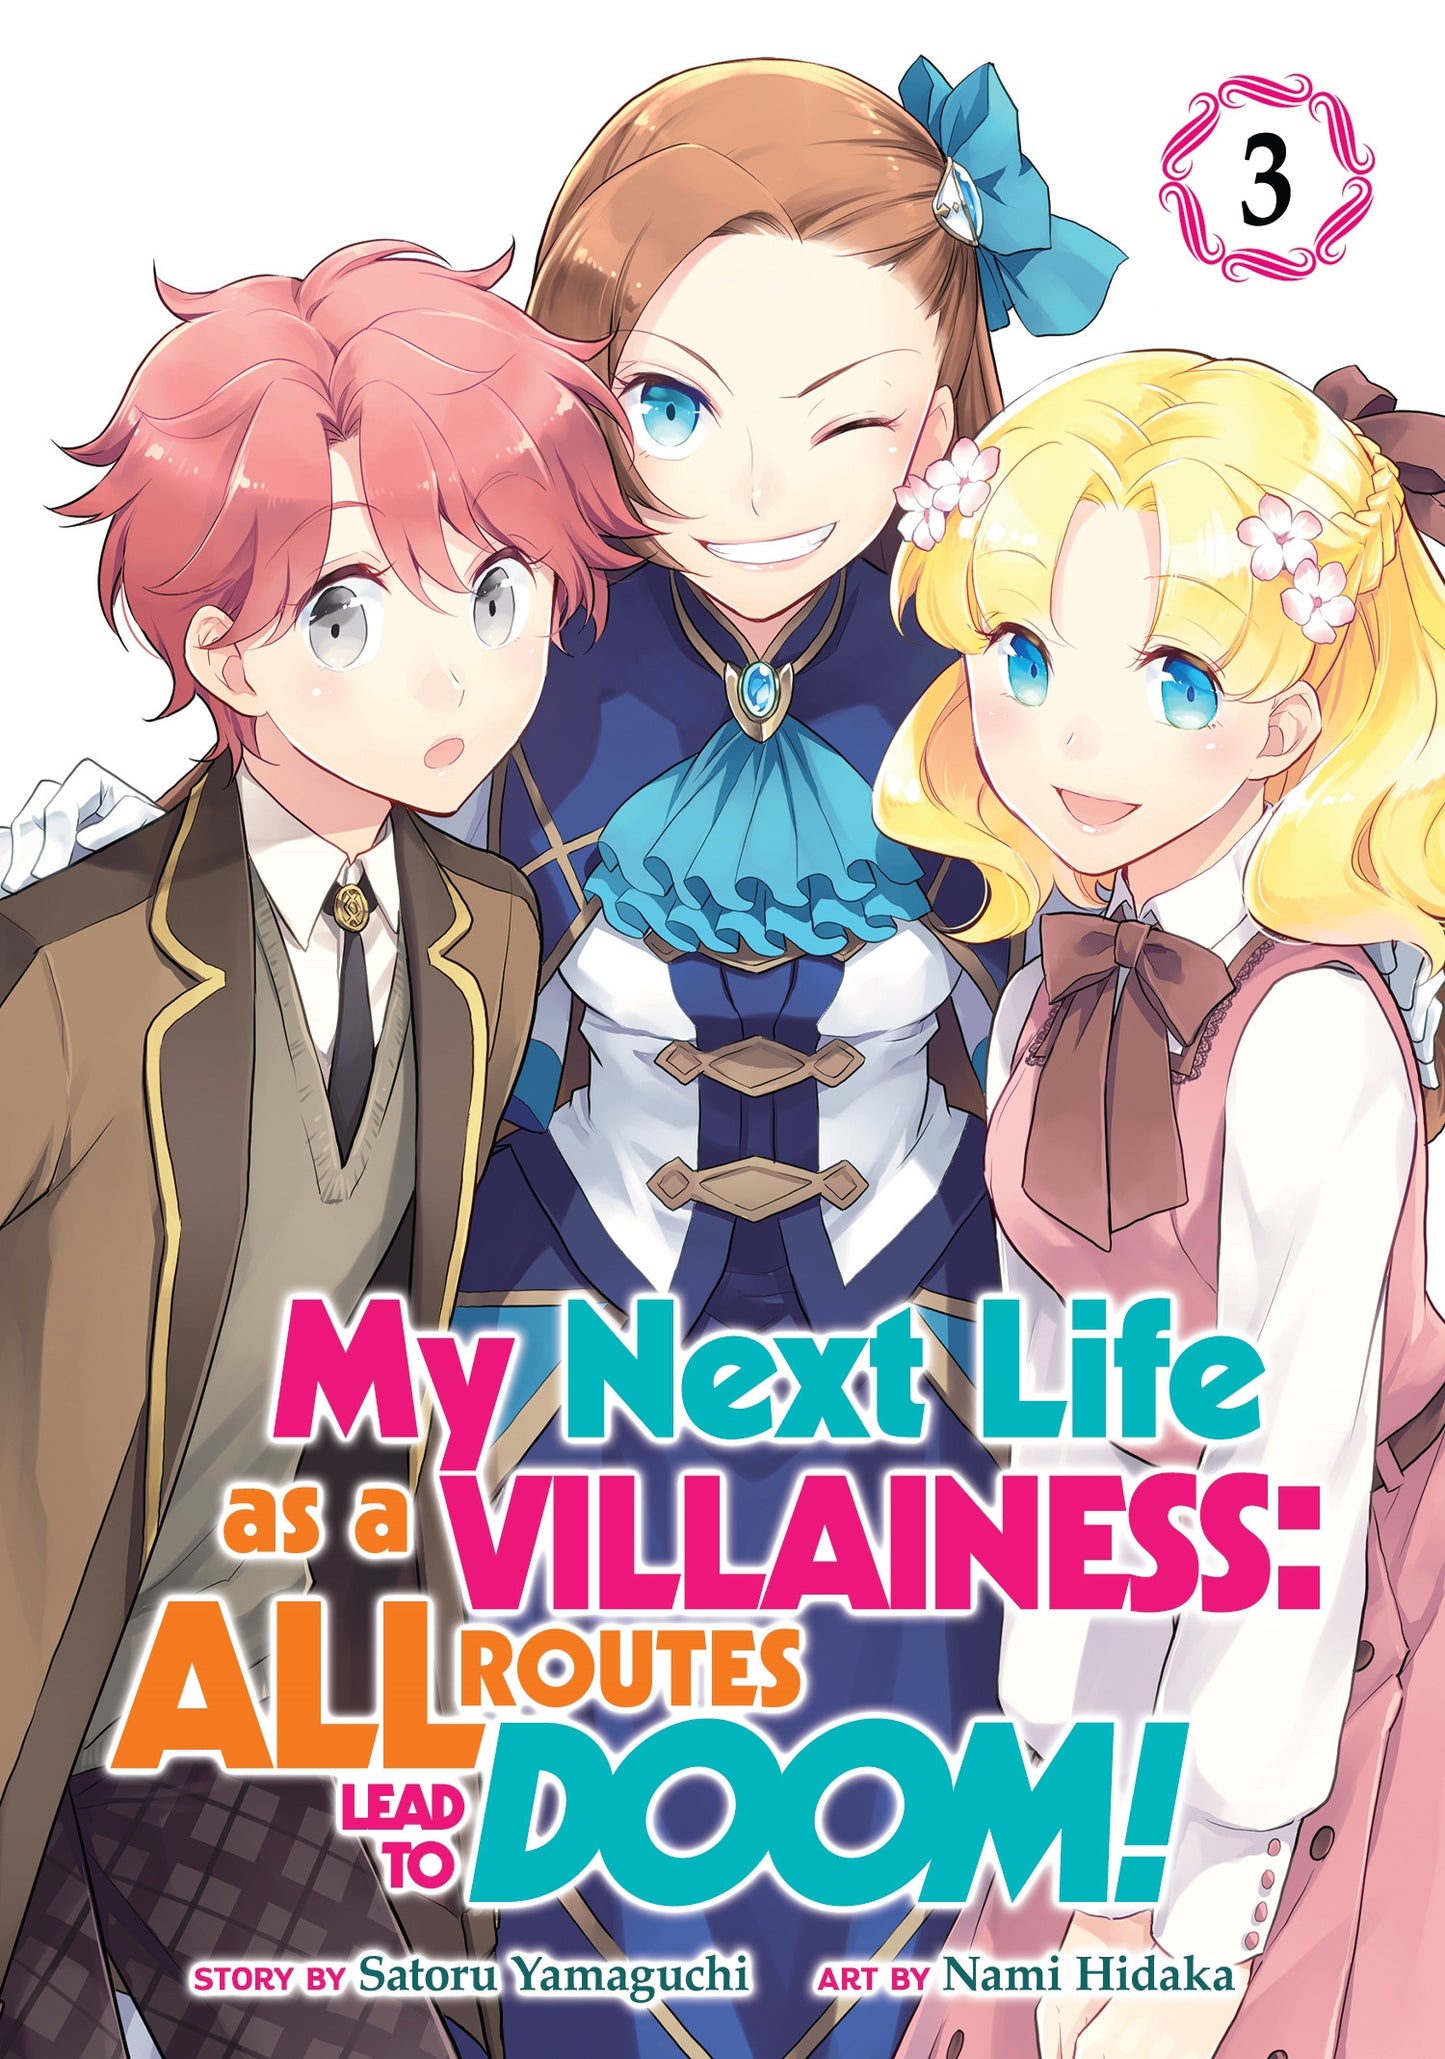 My Next Life as a Villainess All Routes Lead to Doom! (Manga) Vol. 3 - Manga Warehouse